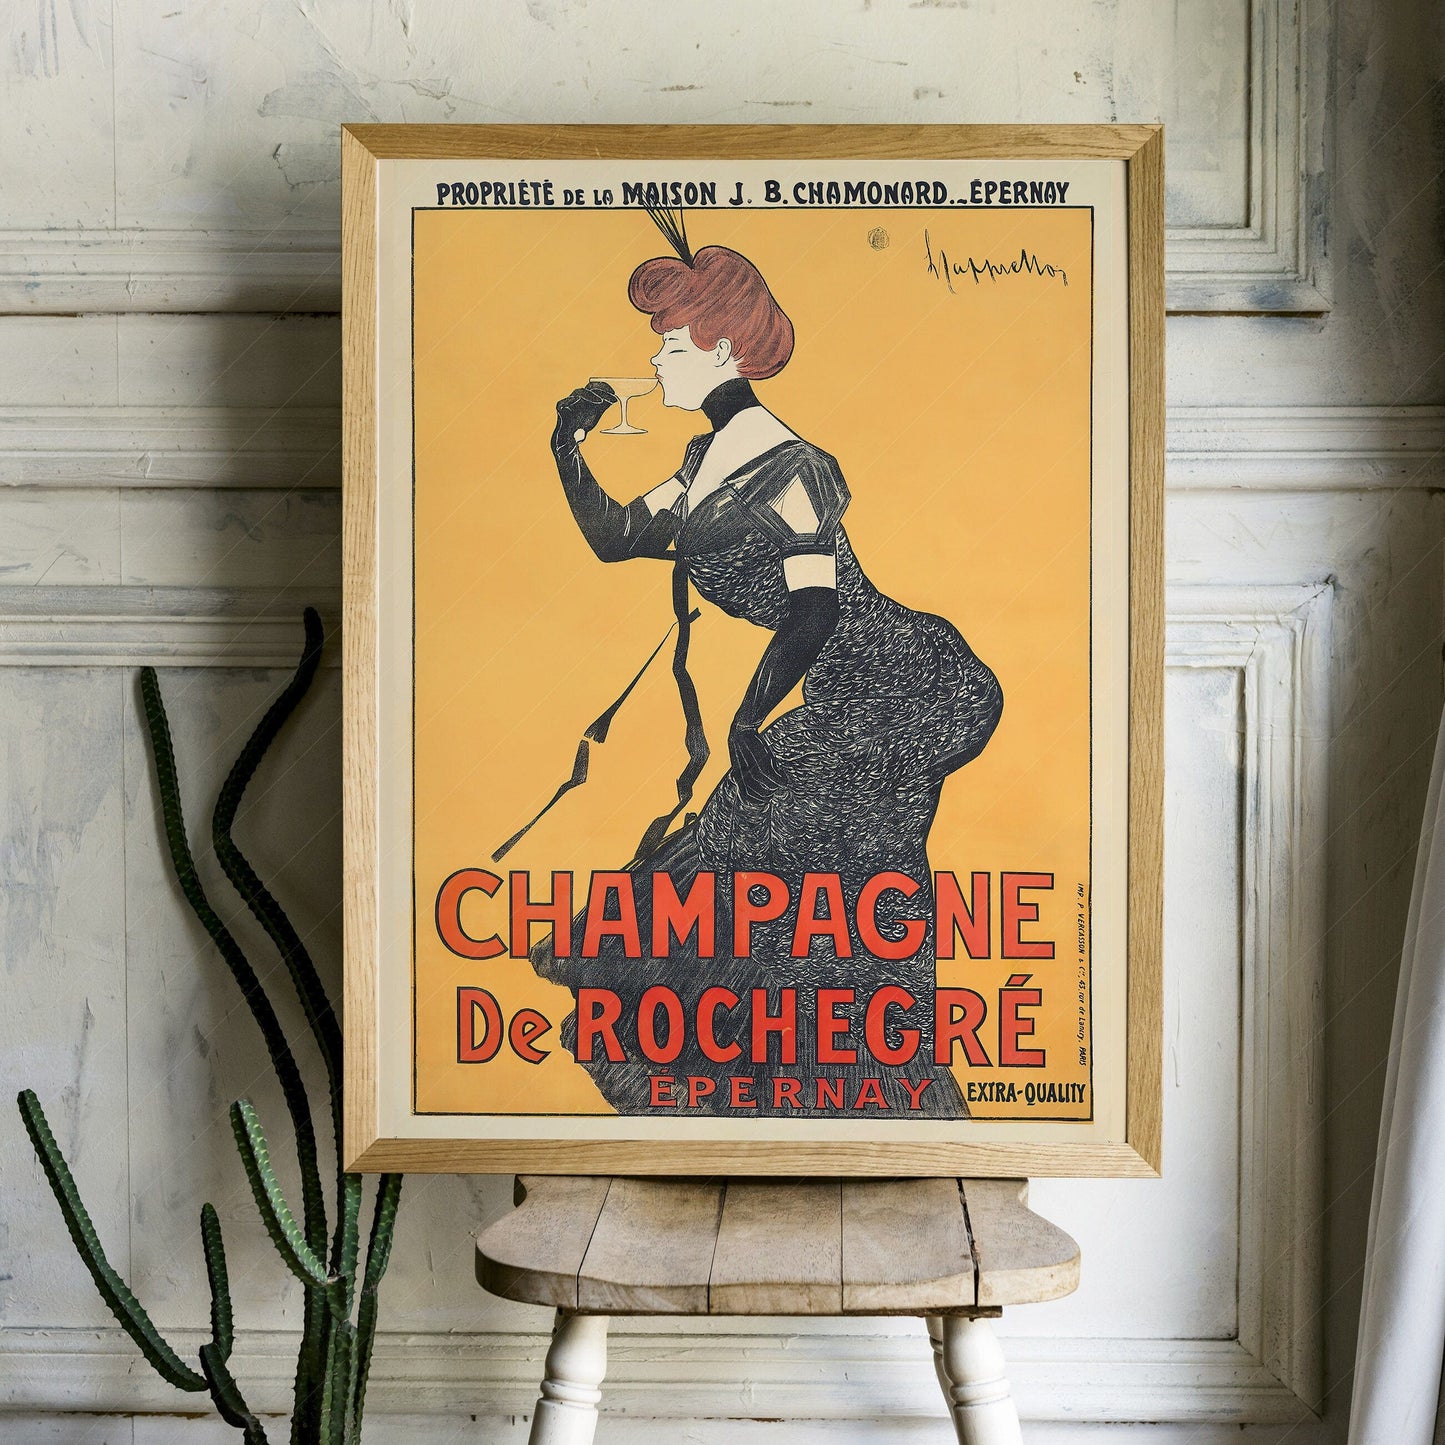 Home Poster Decor Champagne de Rochegre, Vintage Advertising, Drink Poster, Party Wall Decor, Wine Art Print, Elegant Woman, Bar French Girl, Celebrate Bubbly